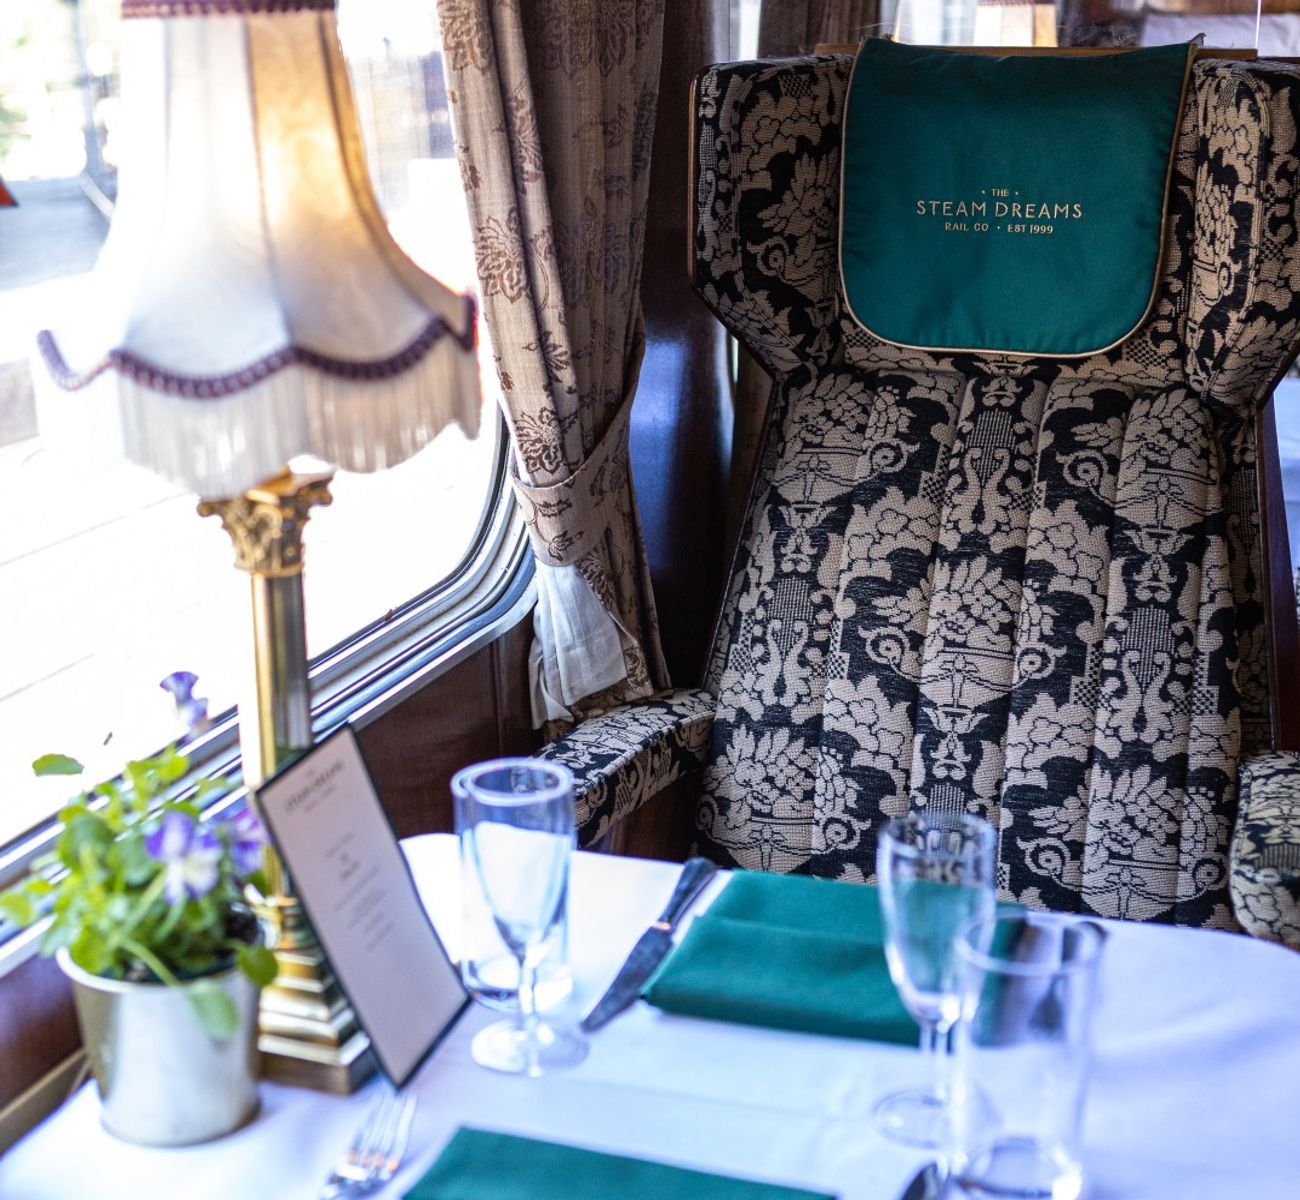 The Christmas steam express is a great addition to a festive itinerary. This image shows a patterned train chair with emerald green decorations.